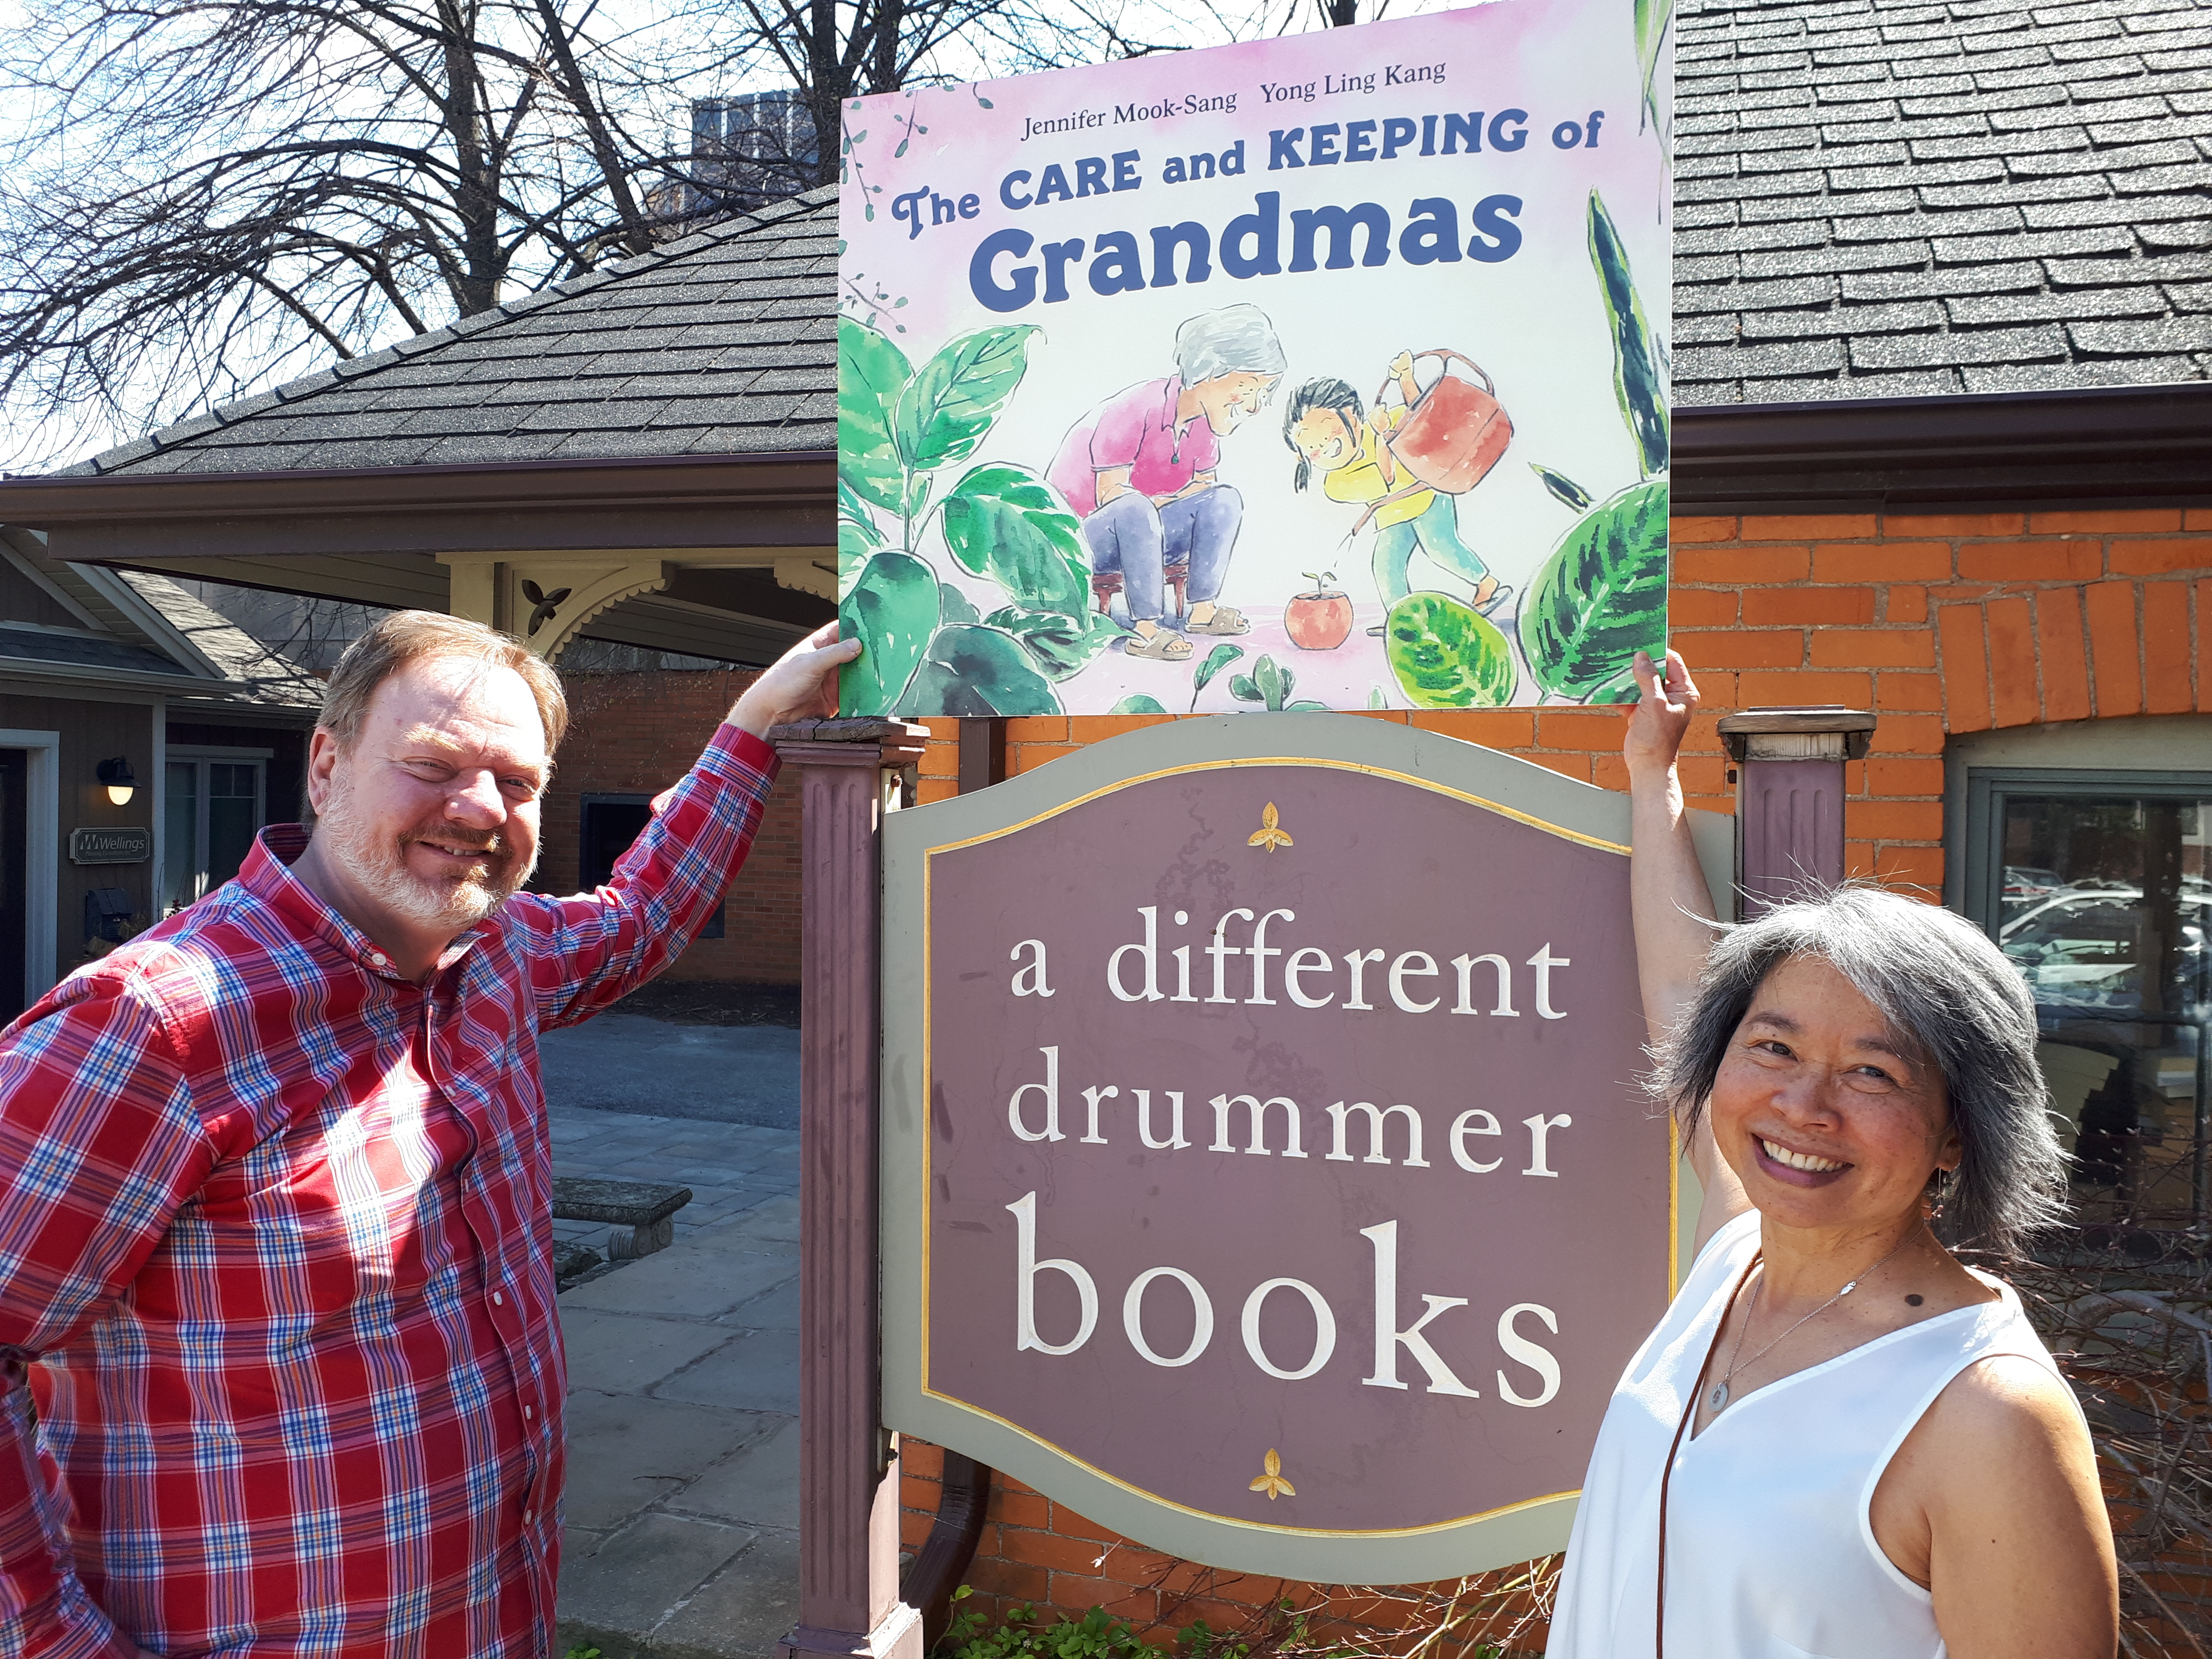 Bookseller Ian Elliot of A Different Drummer Books in Burlington, and author Jennifer Mook-Sang